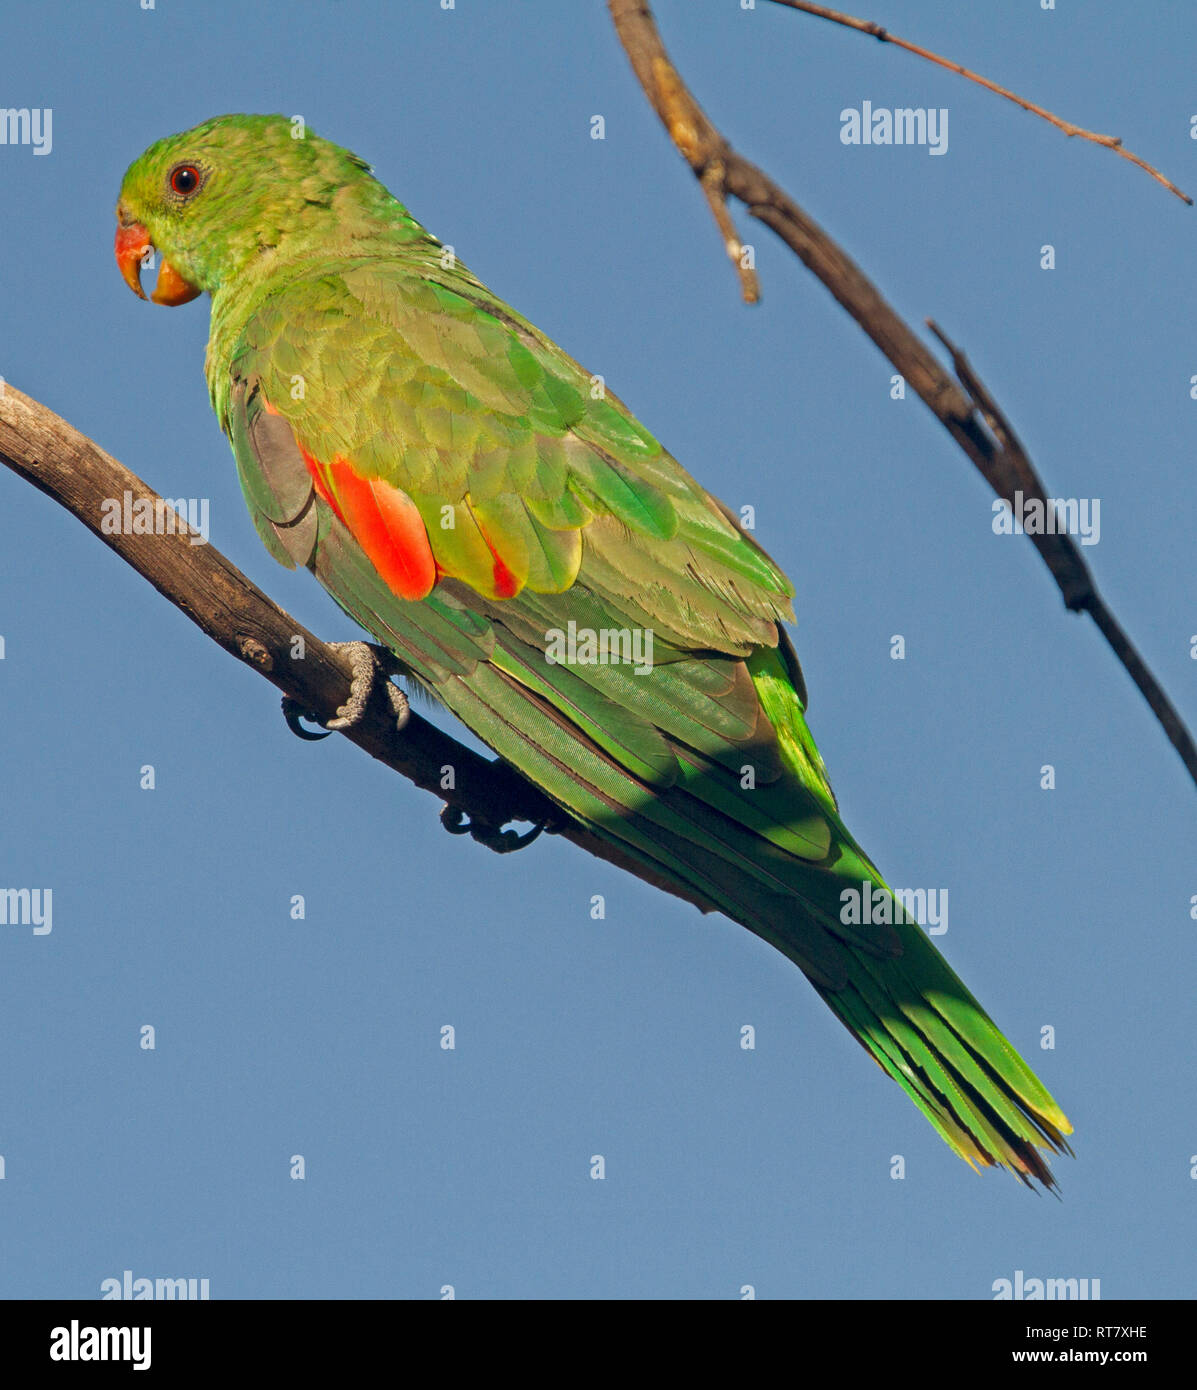 Juvenile Australian red-winged parrot, Aprosmictus erythropterus, in the wild, perched on branch of tree with bill open against blue sky Stock Photo